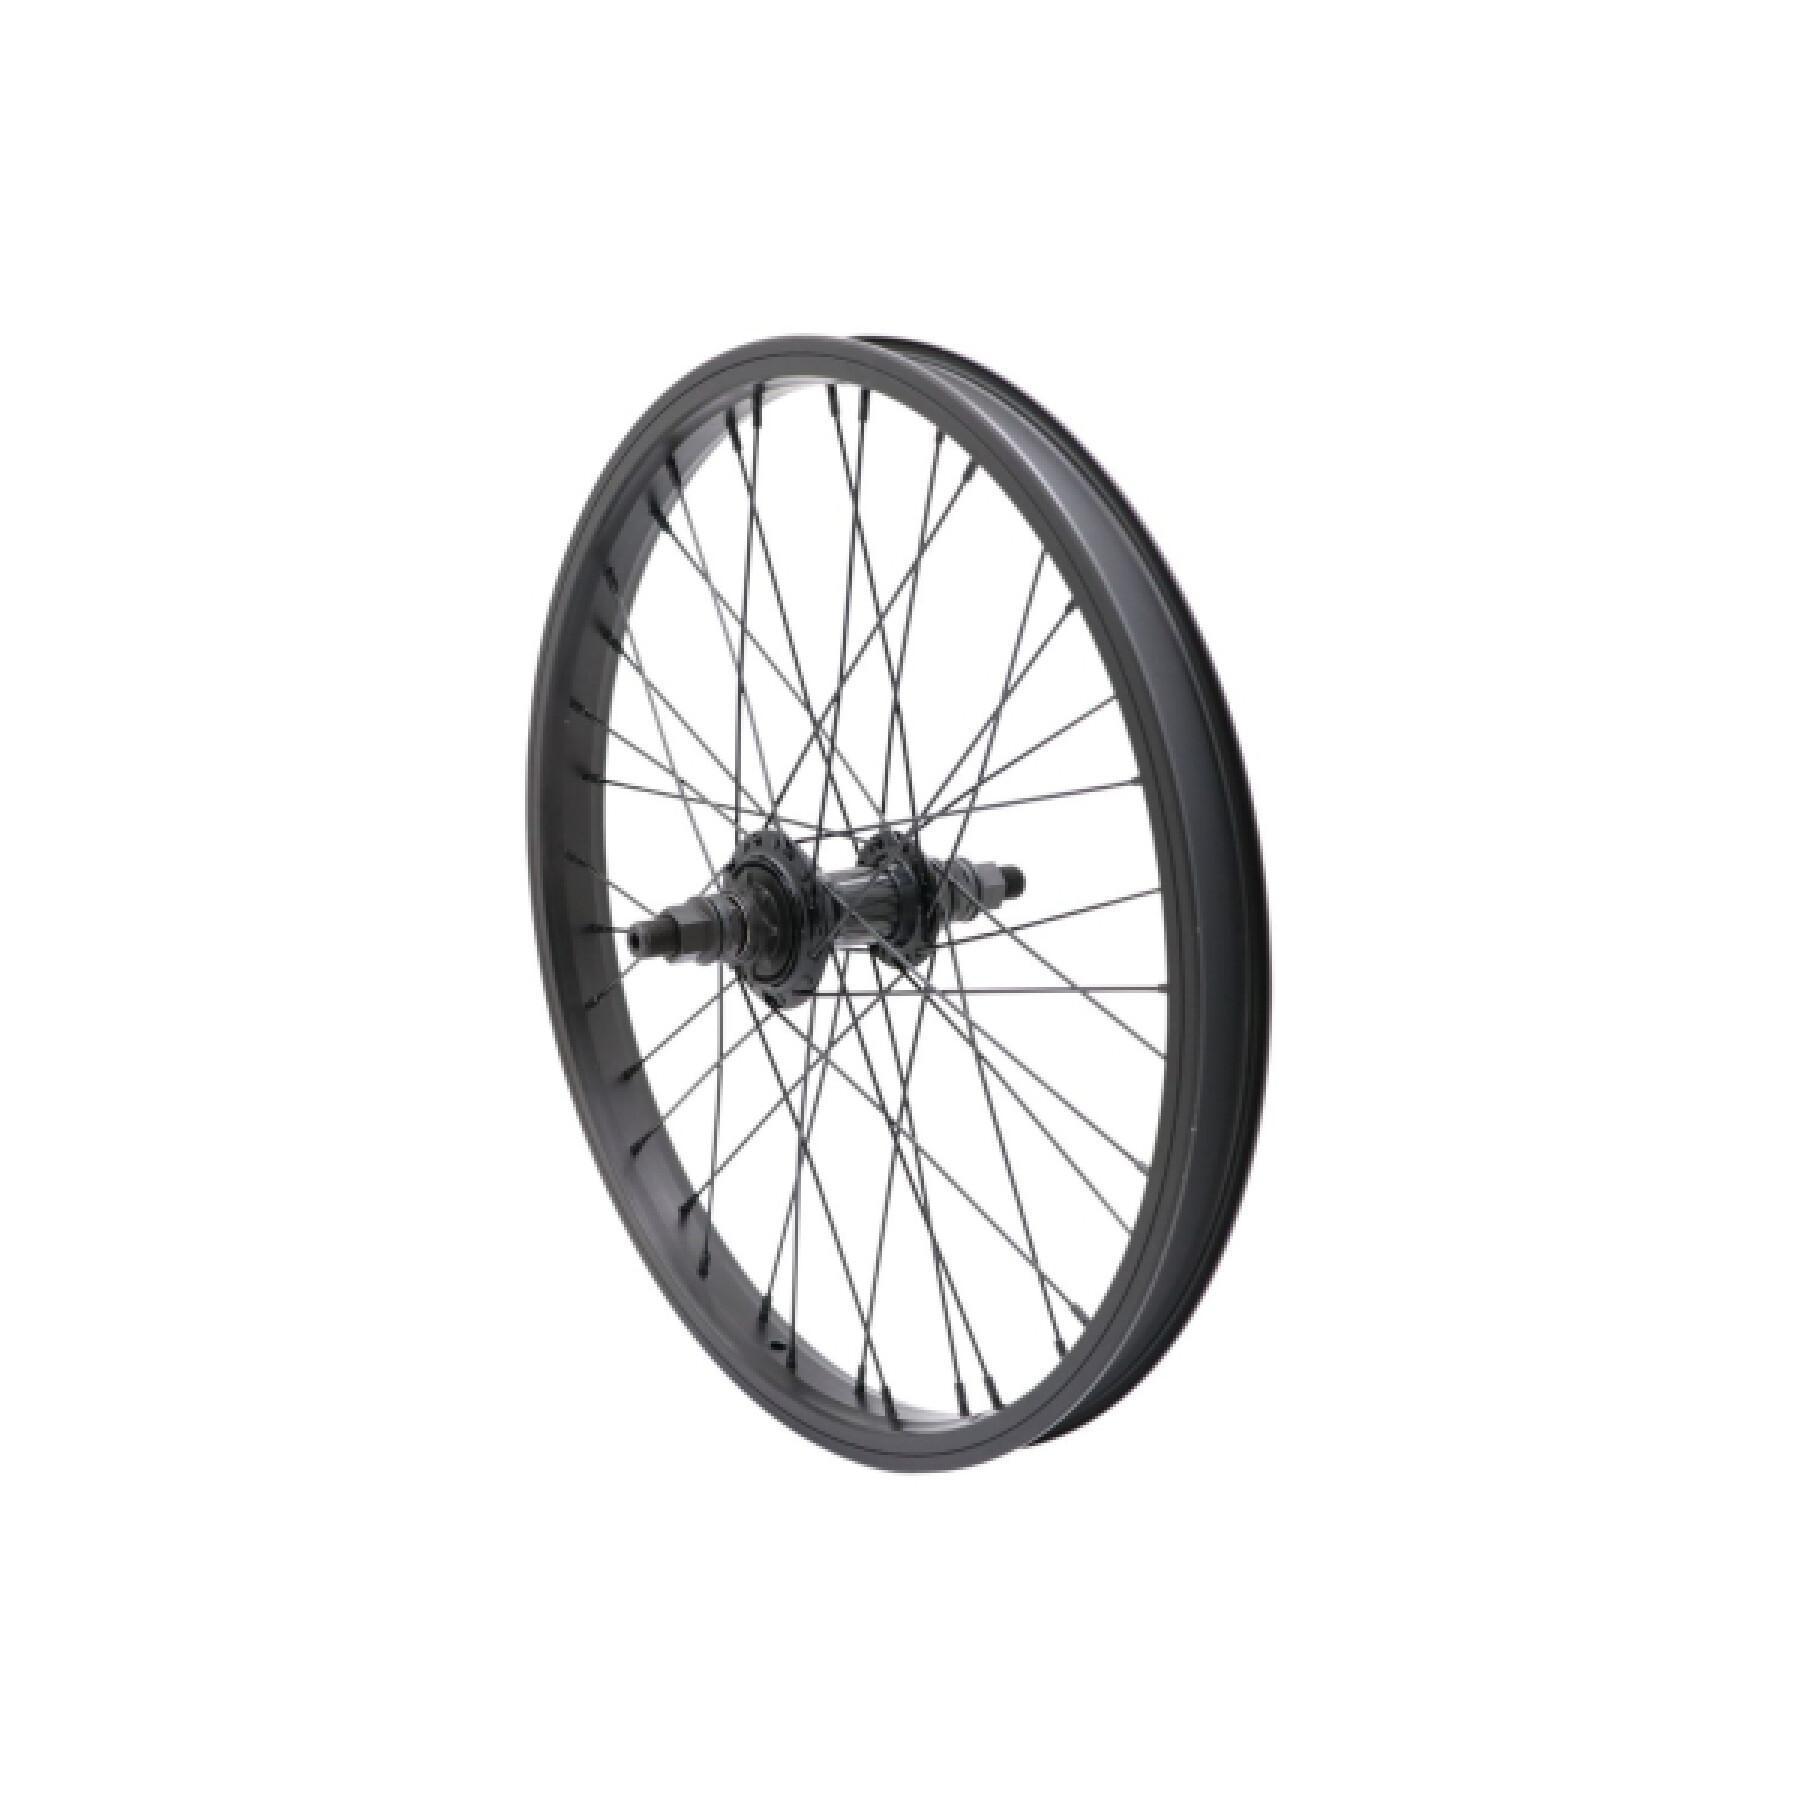 Ruota posteriore di bicicletta GT Bicycles Freestyle LHD